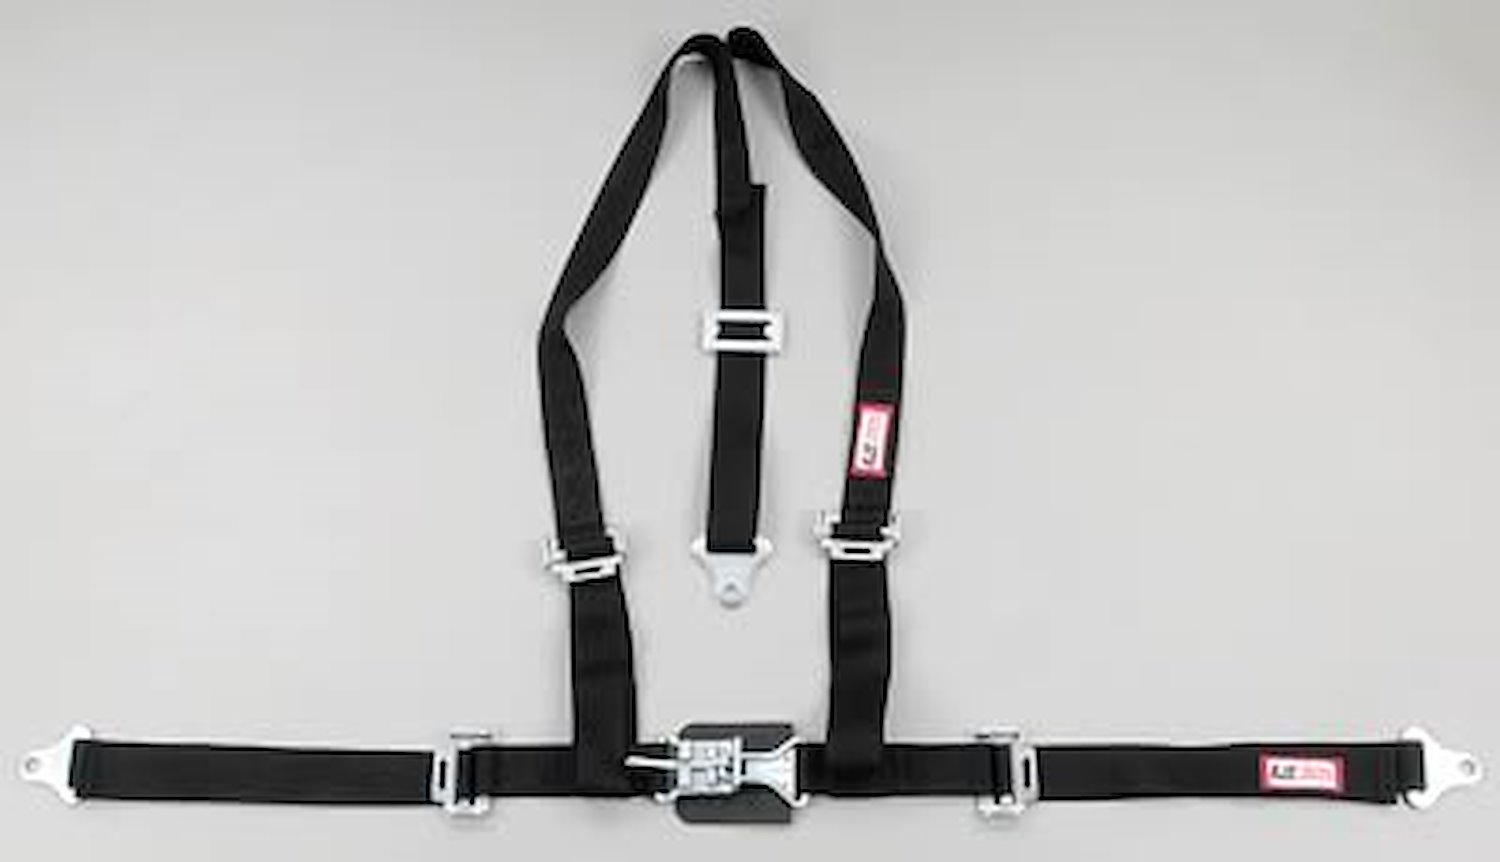 NON-SFI L&L HARNESS 3 PULL DOWN Lap Belt SEWN IN 2 Shoulder Harness V ROLL BAR Mount w/STERNUM STRAP ALL WRAP ENDS BLUE